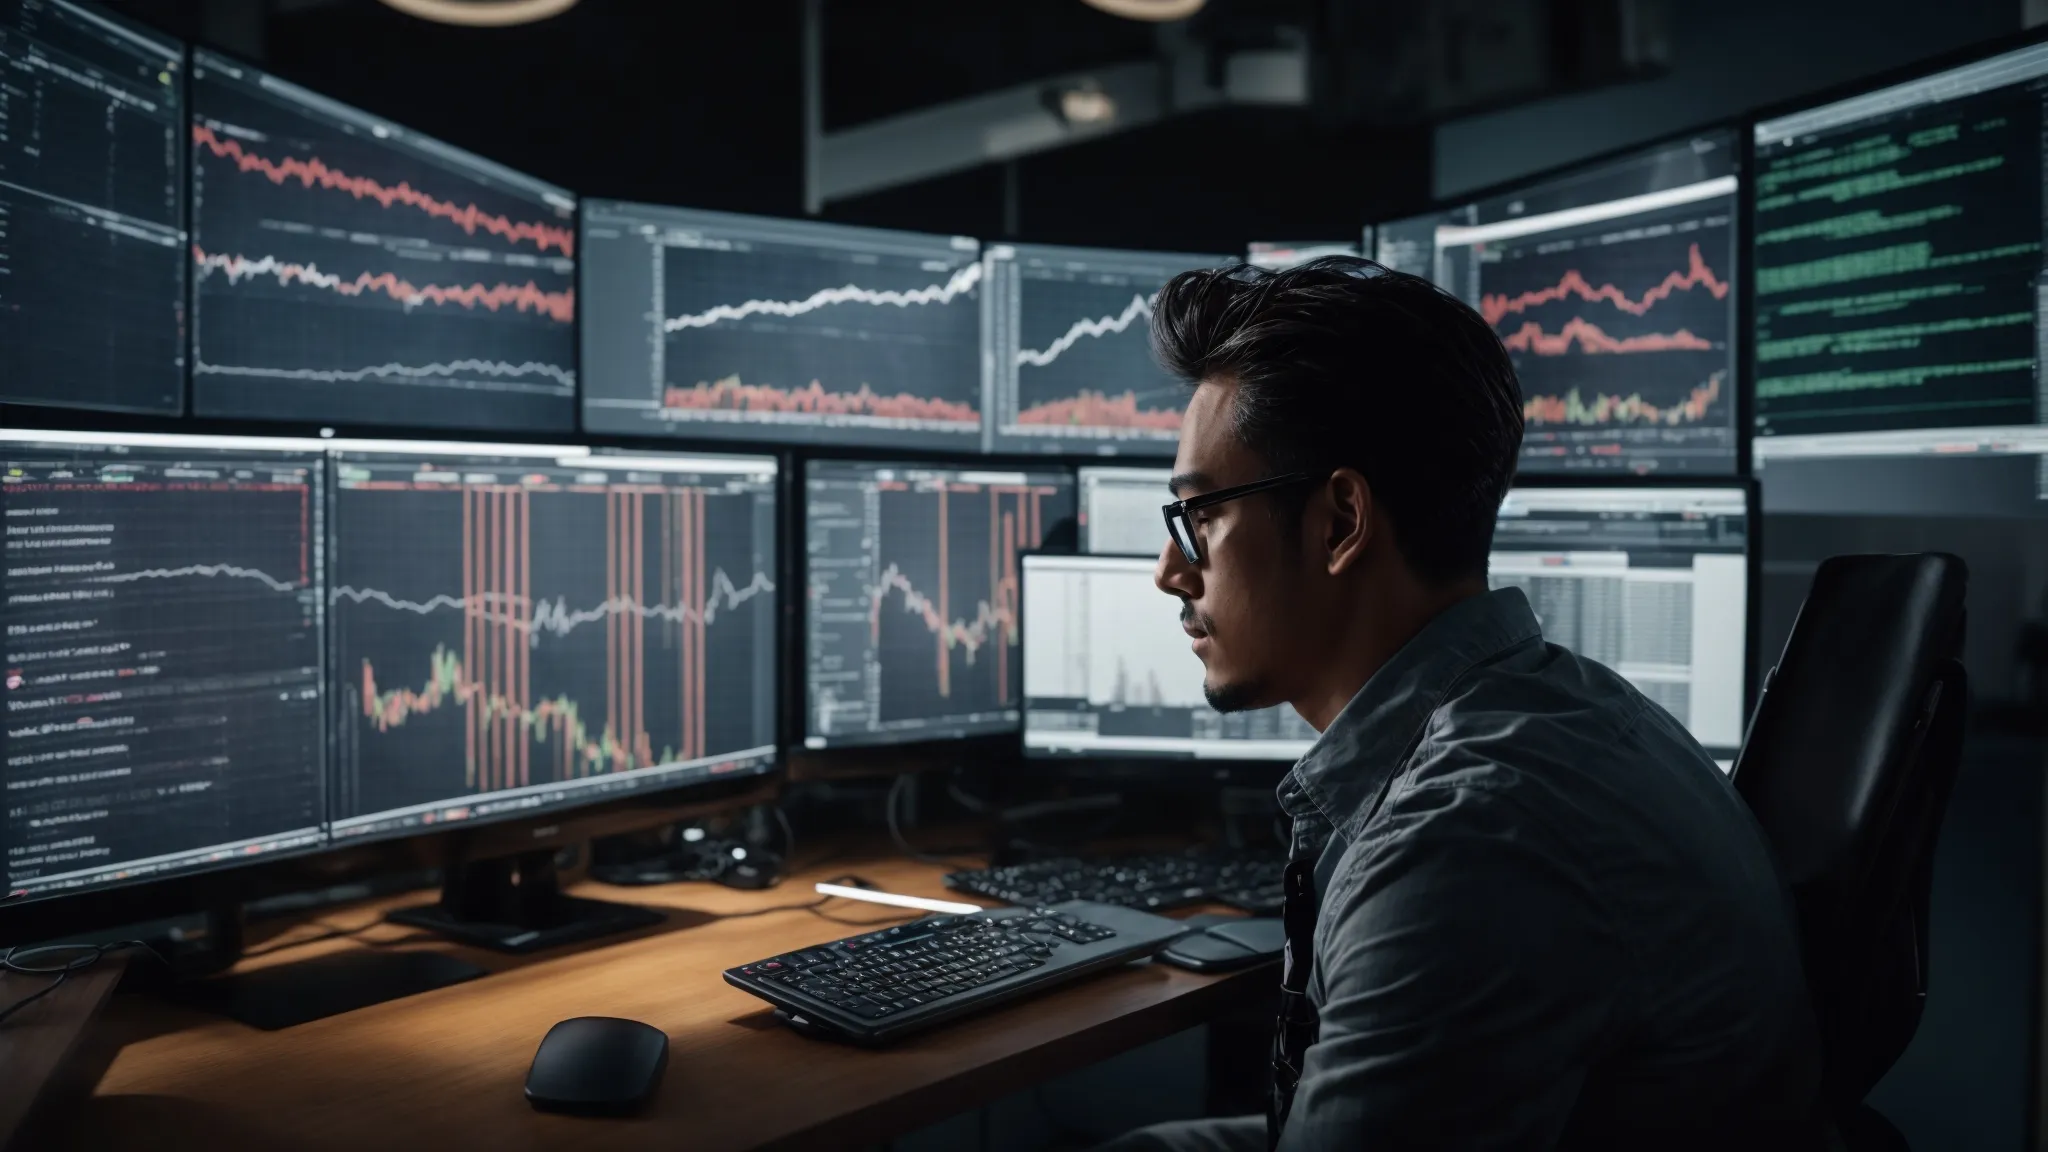 a focused individual examines data analytics on a computer screen surrounded by graphs and market research reports.